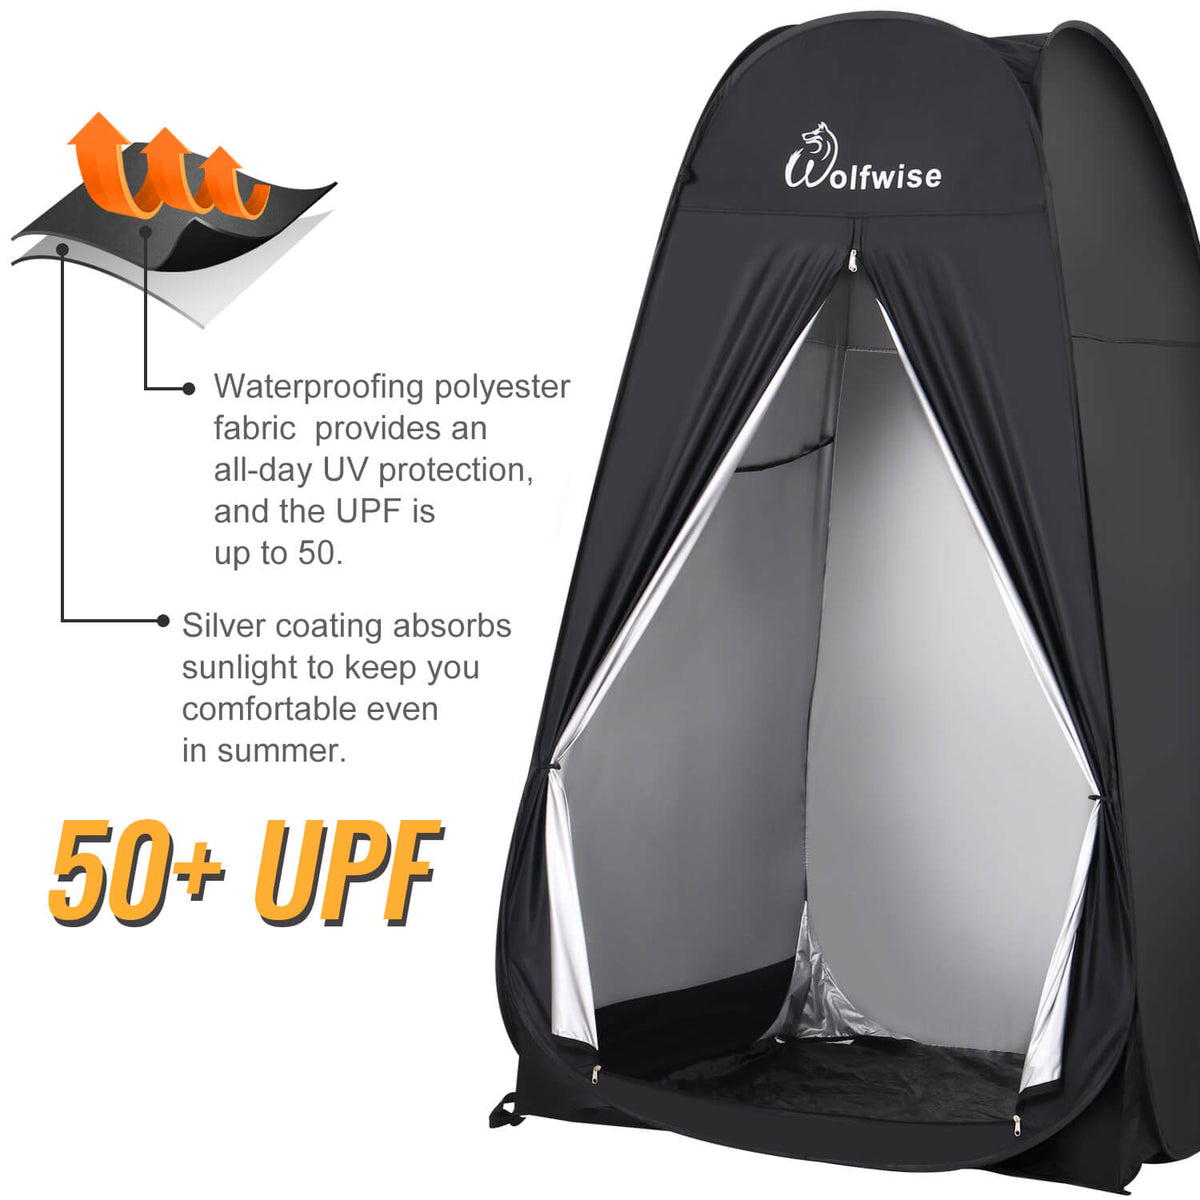 WolfWise Pop up toilet tent camping shower tent changing tent outdoor mobile 